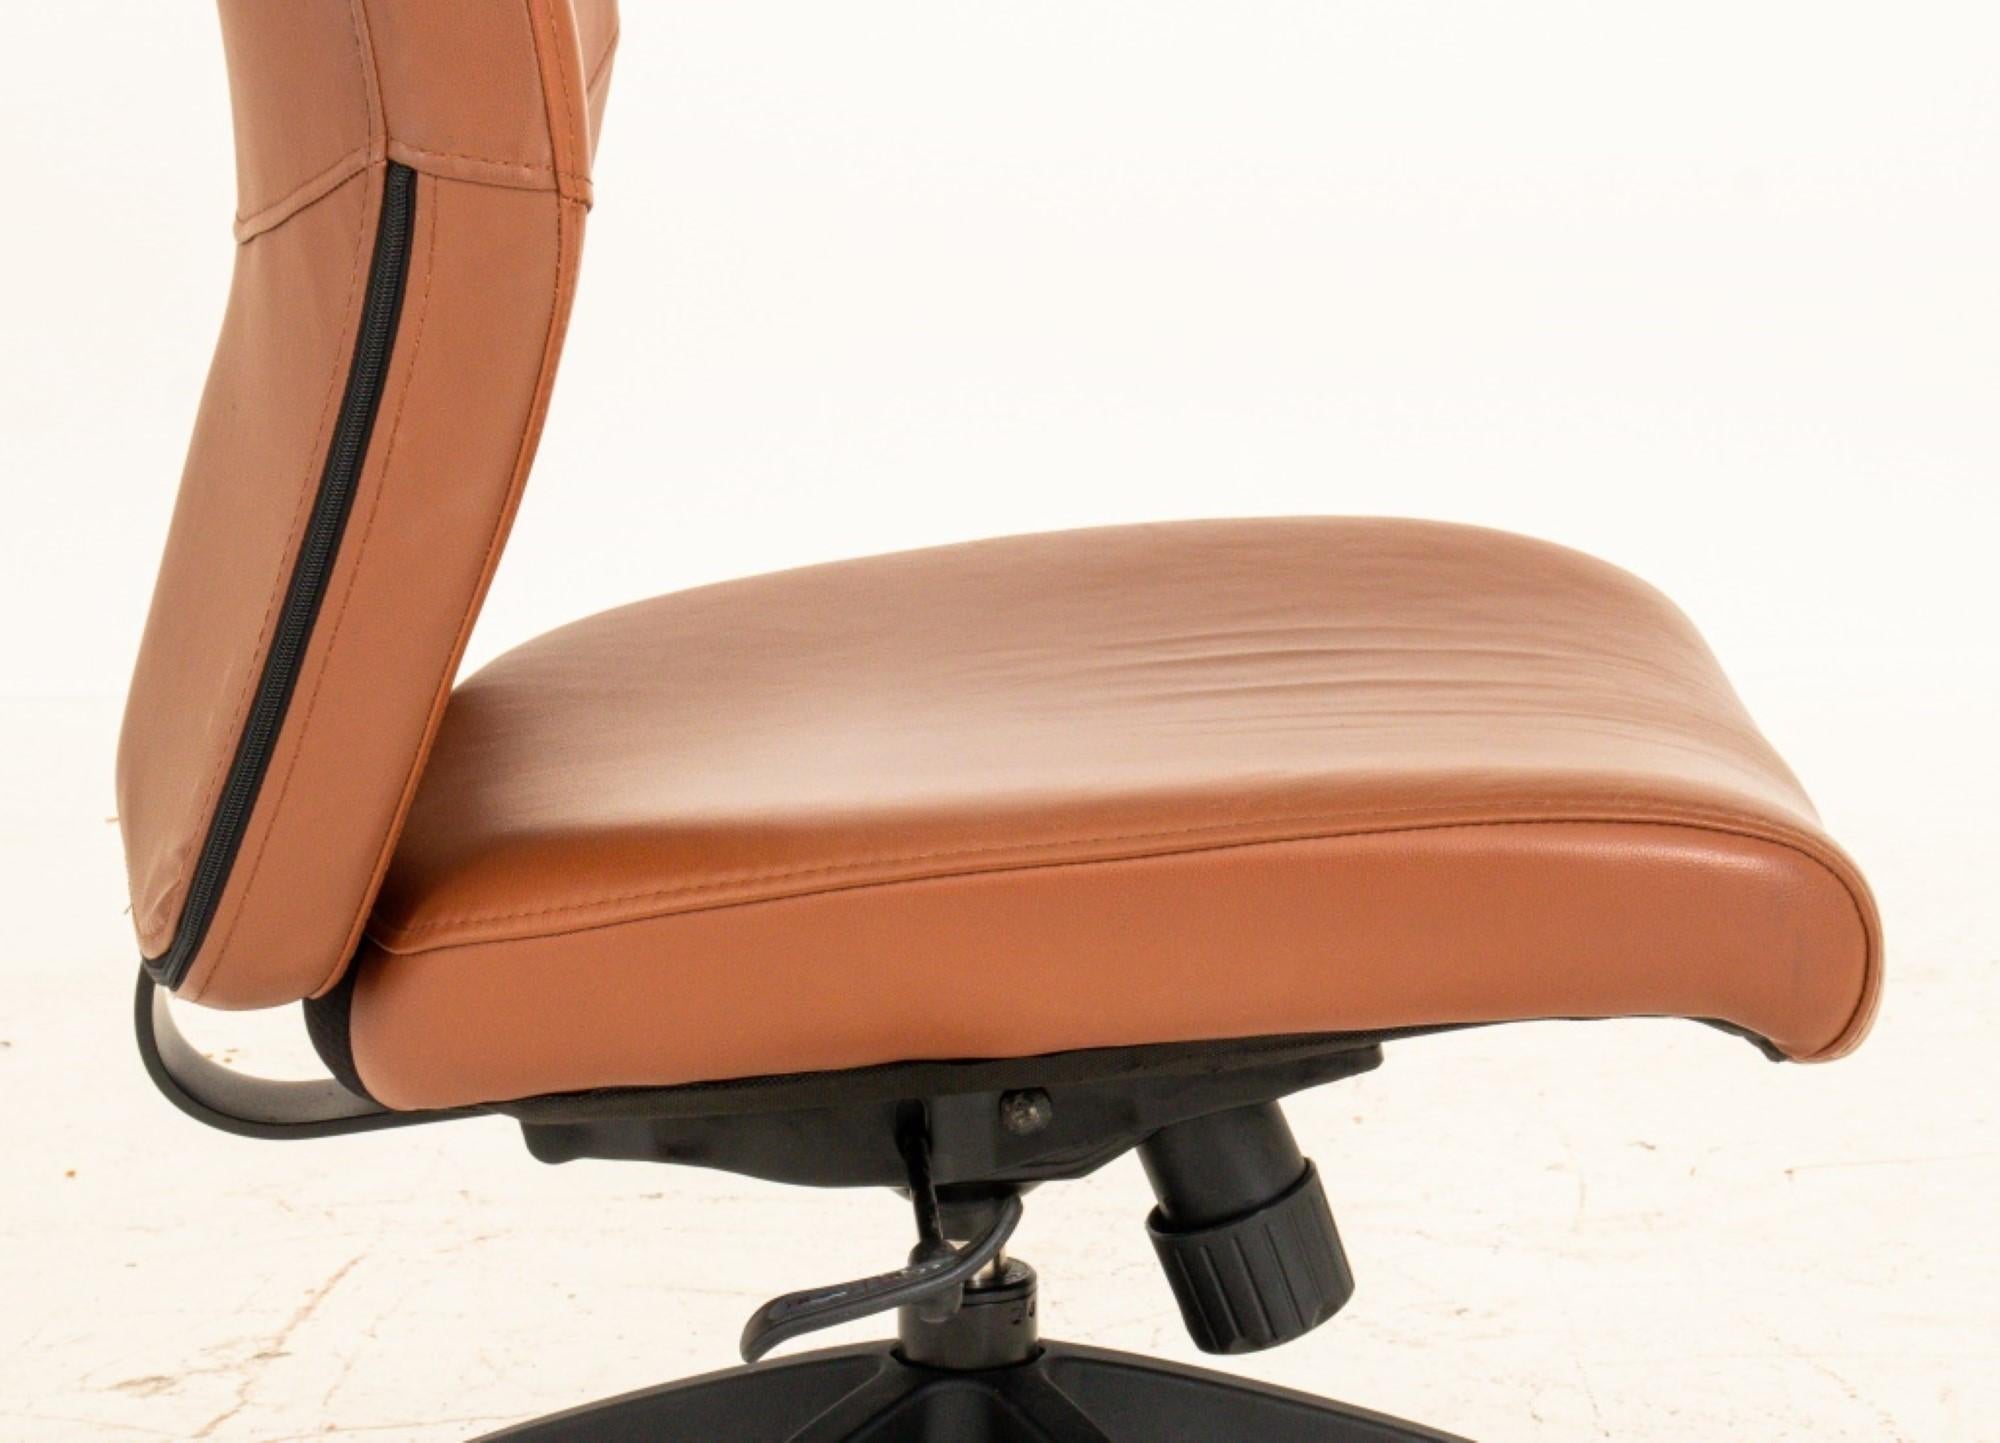 Faux brown leather swivel desk chair on wheels, with adjustable height, unmarked.

38 inches in height, 21 inches in width, and 20 inches in depth; seat height is 16 inches.